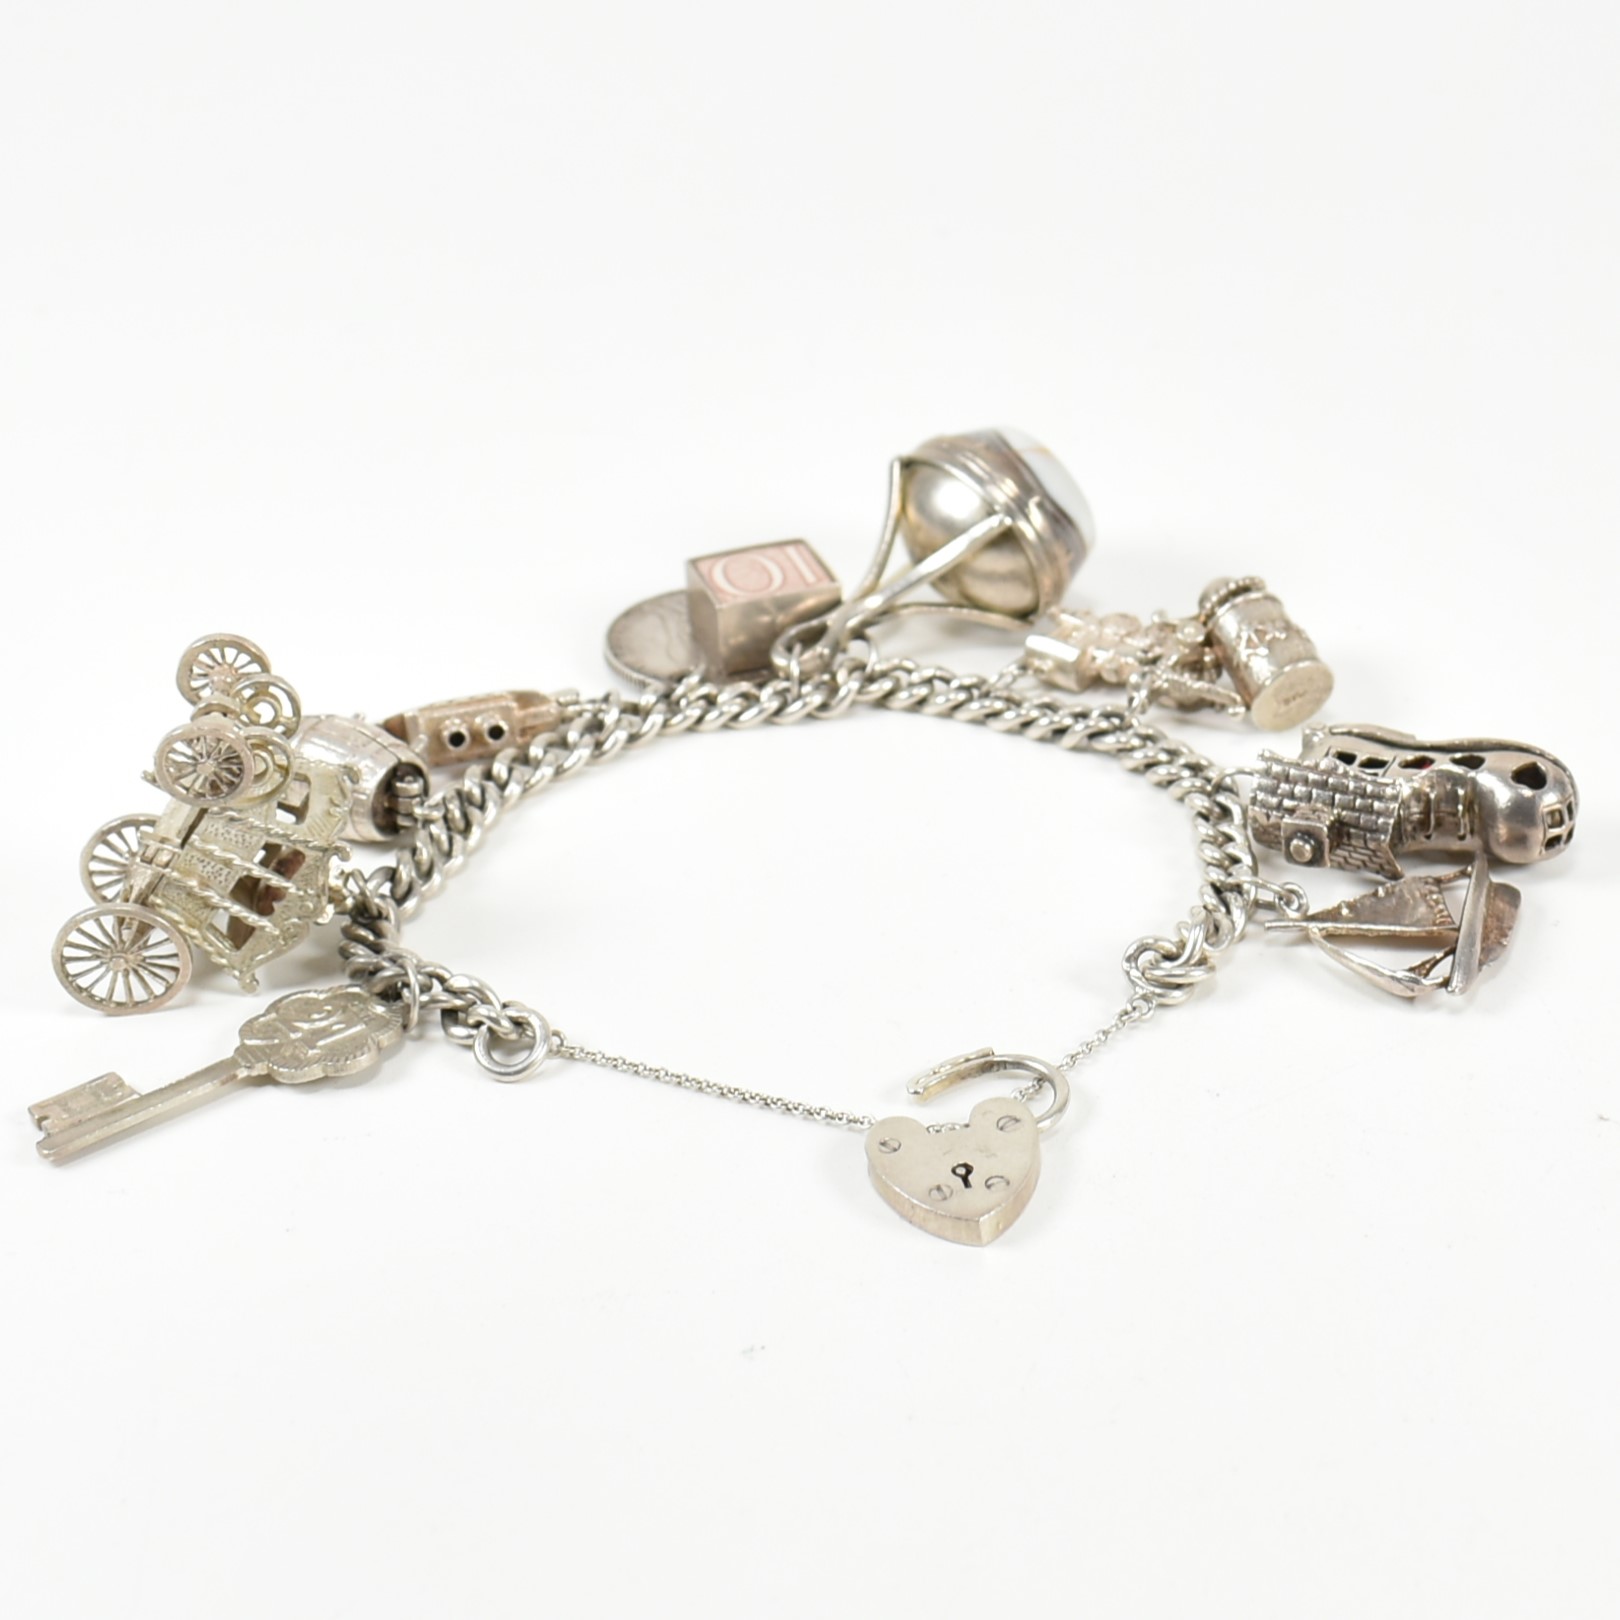 SILVER CHARM BRACELET WITH INTAGLIO SEAL FOB CHARM - Image 5 of 8